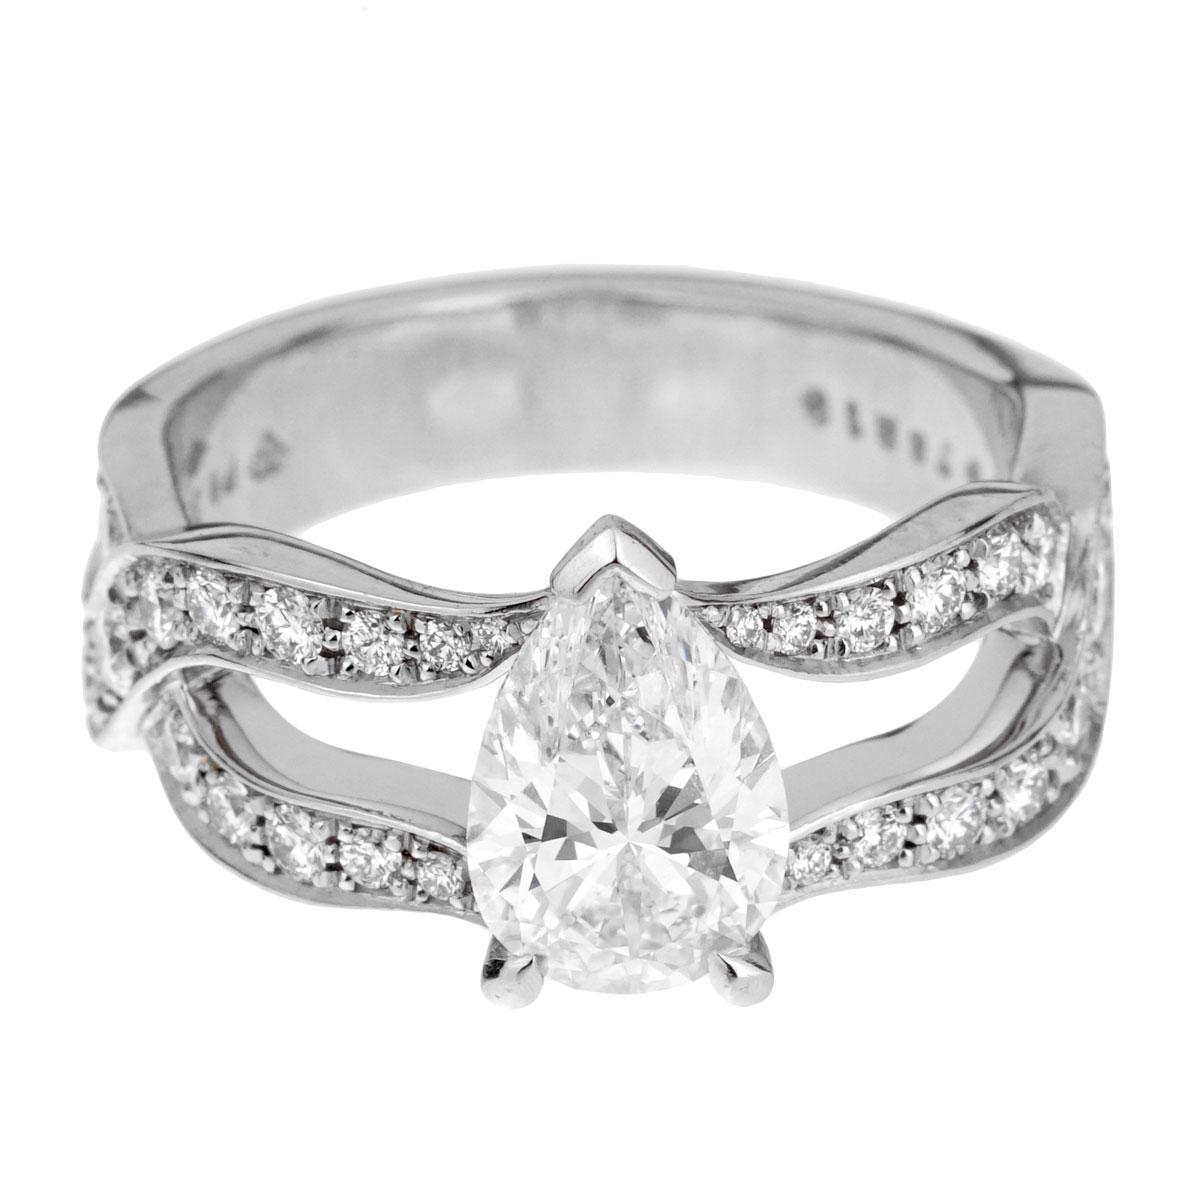 A pear-cut diamond engagement ring from the famed Swiss jeweler Piaget. The fluidity of the platinum band, which is entwined in a double loop set with 50 round brilliant-cut diamonds, supports the beautiful pear-cut diamond solitaire. The pear